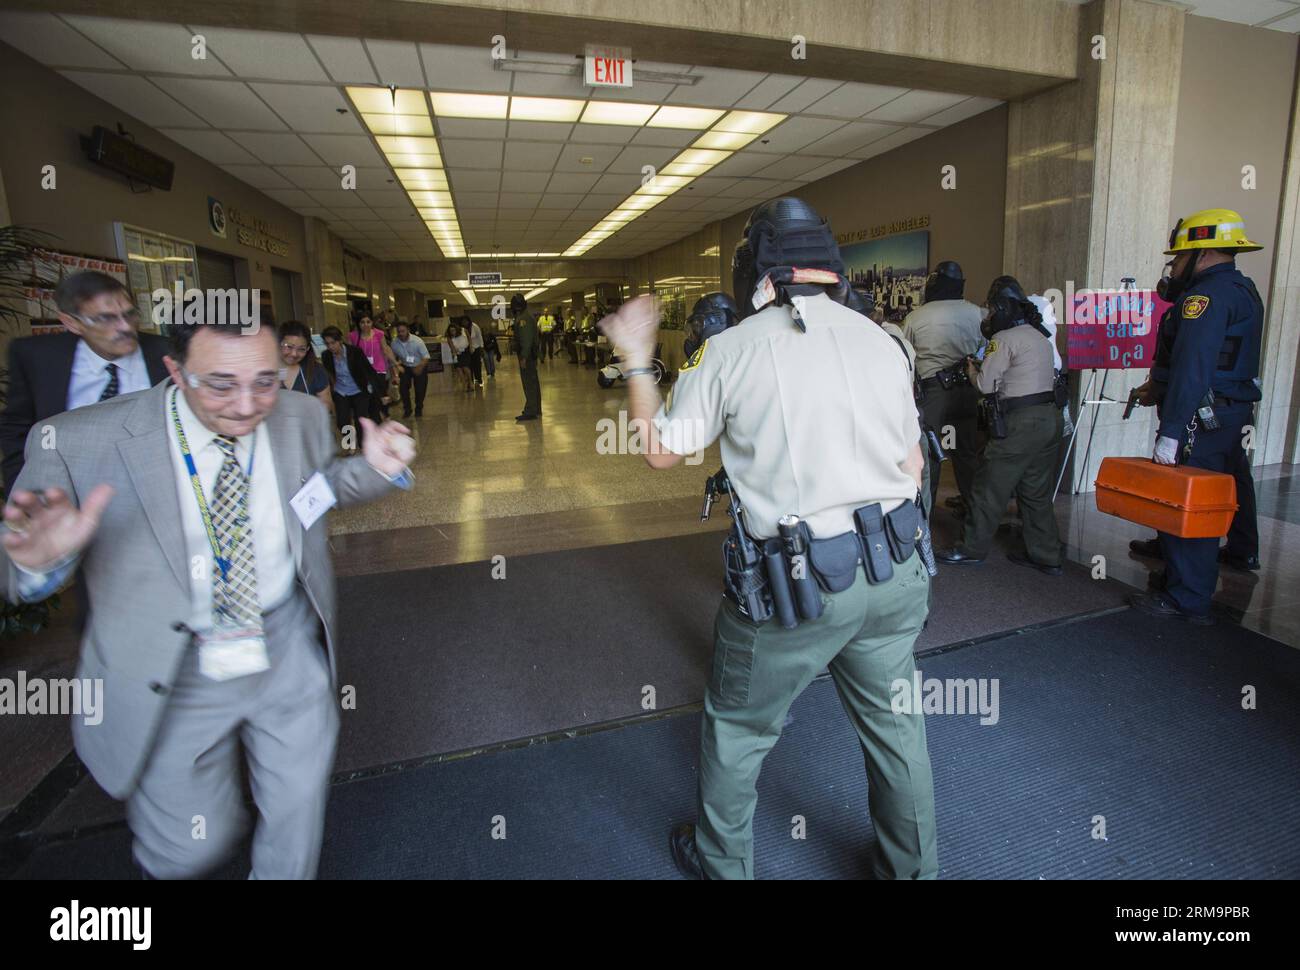 (140529) -- LOS ANGELES, May 29, 2014 (Xinhua) -- Members of Special Enforcement Bureau evacuate the County staff at Los Angeles County Hall of Administration during a training exercise involving a simulated shooting in downtown Los Angeles, the United States, on May 28, 2014. The Los Angeles County Sheriff s Department held a large-scale training exercise involving a simulated shooting taking place at a Board of Supervisors meeting here Wednesday. (Xinhua/Zhao Hanrong) (zjl) U.S.-LOS ANGELES-SHOT-TRAINING EXERCISE PUBLICATIONxNOTxINxCHN   Los Angeles May 29 2014 XINHUA Members of Special Enfo Stock Photo